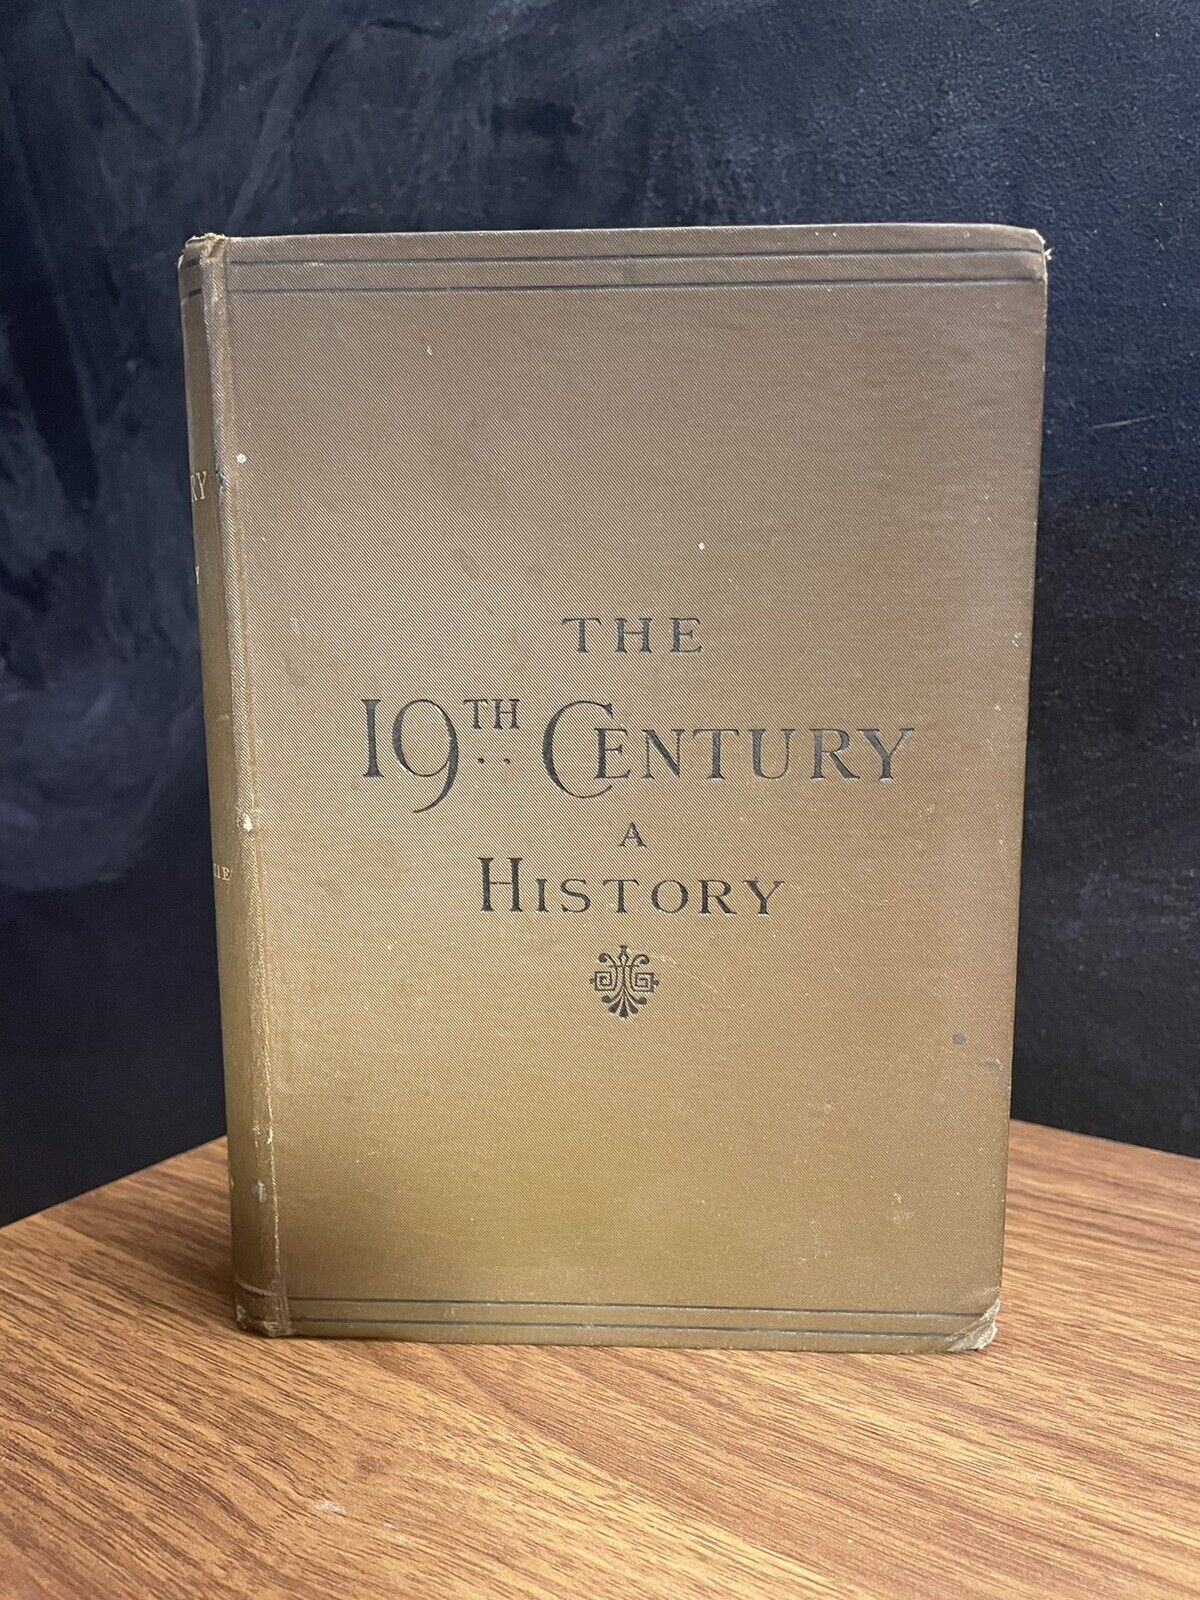 Antique 1895 The 19th Century A History by Robert Mackenzie